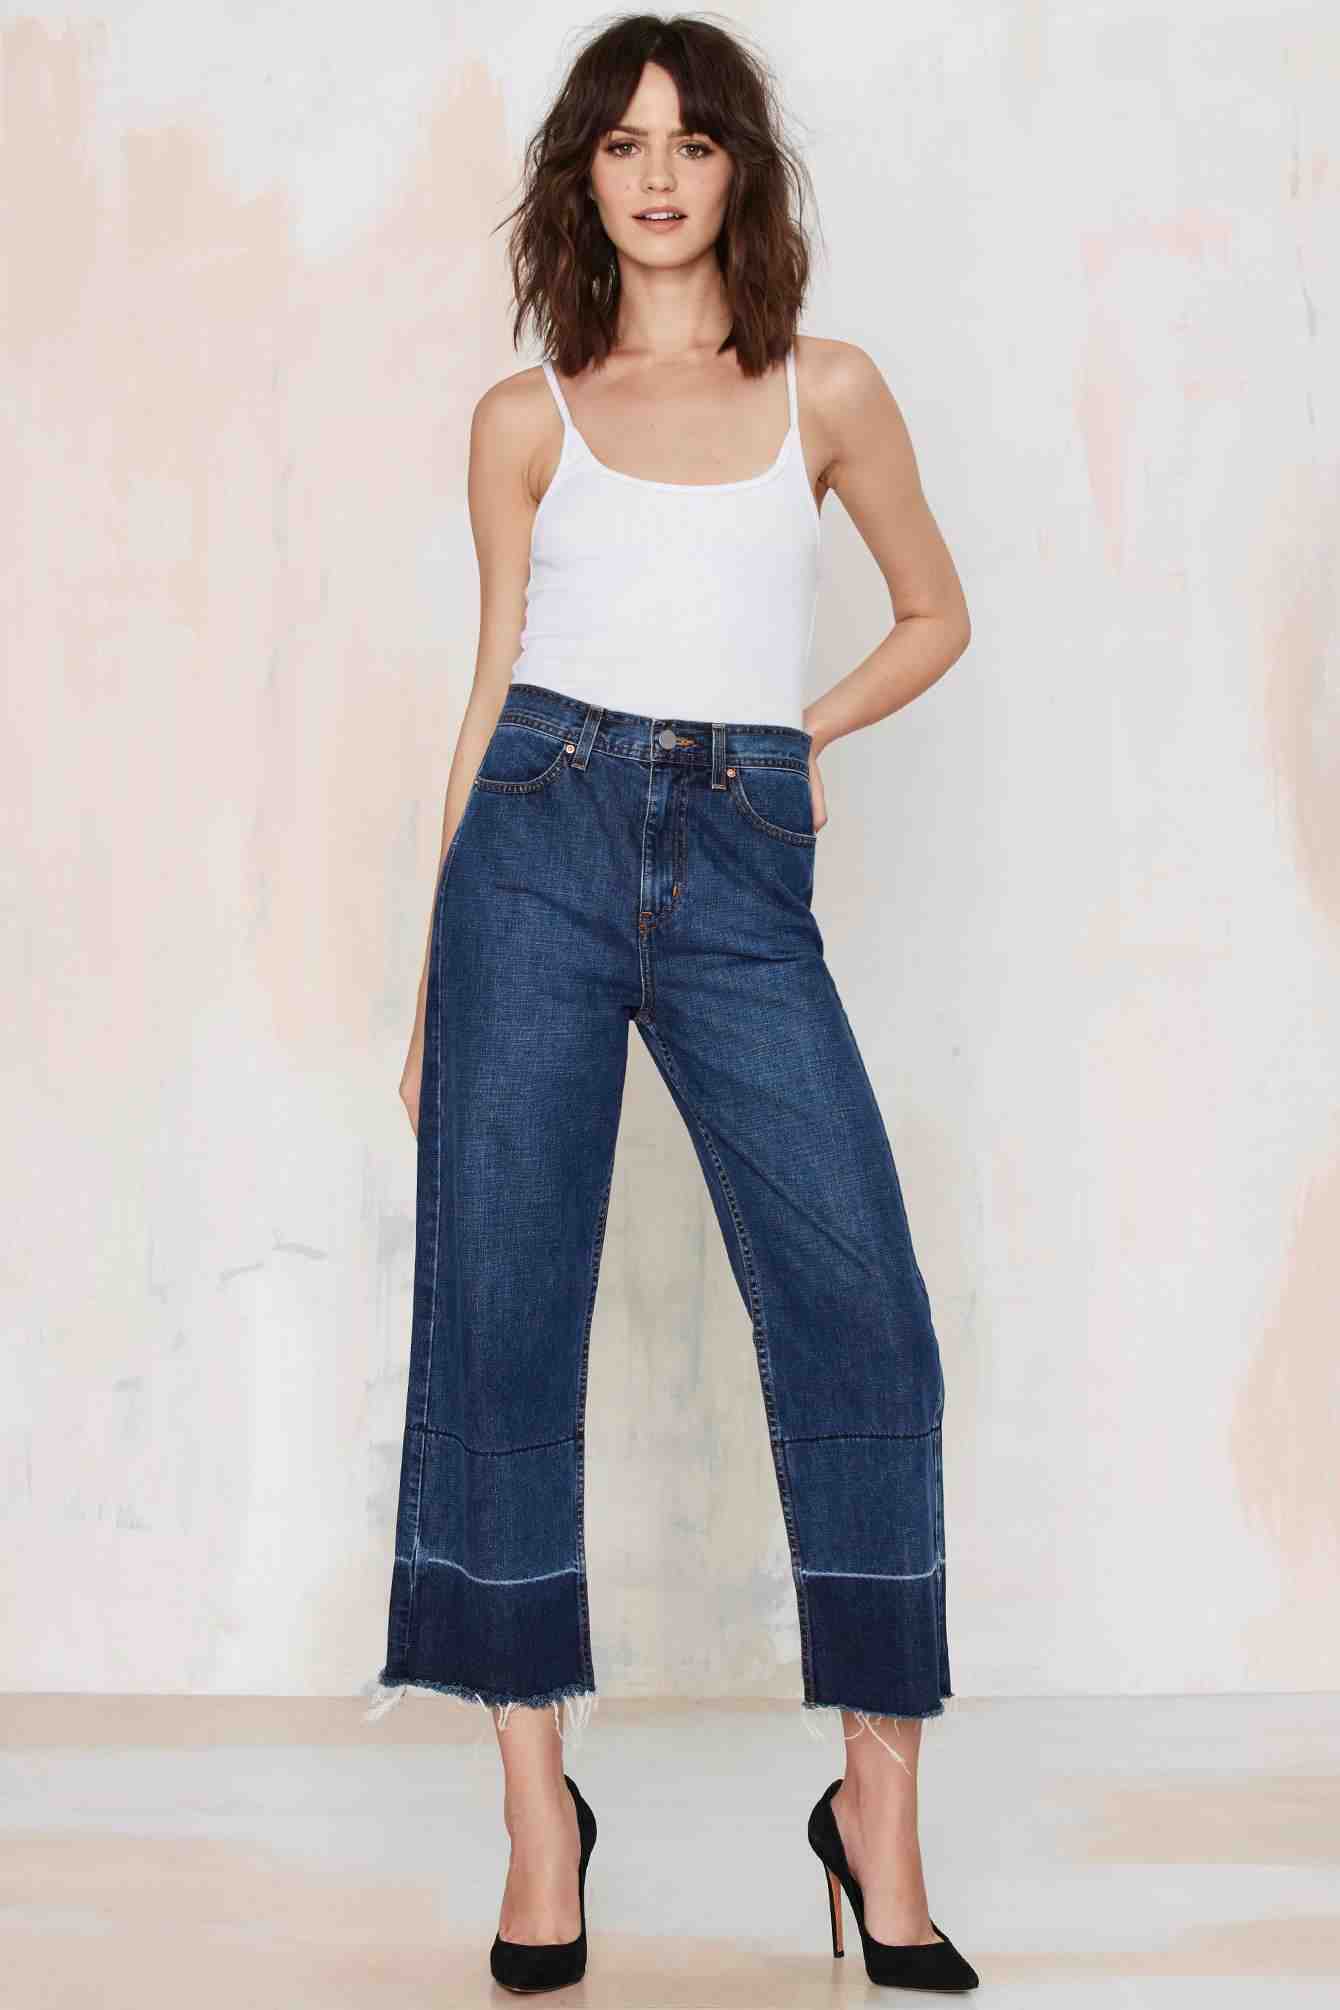 Nasty Gal - jeans (88€)